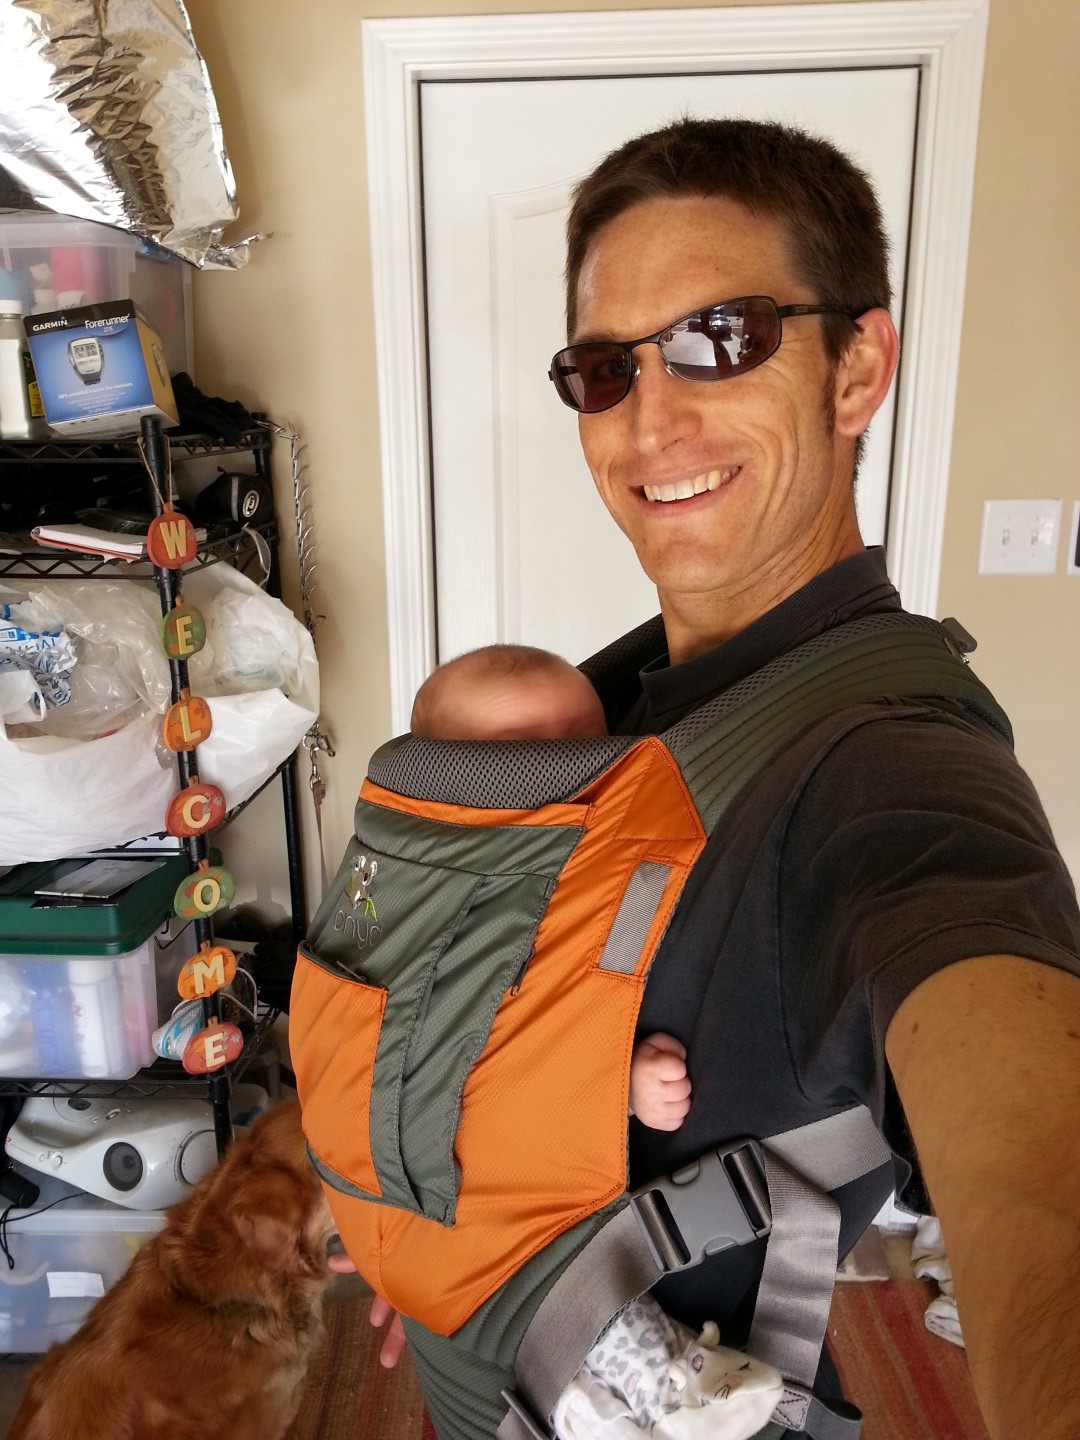 Is it really just a "selfie" when you have your baby too?